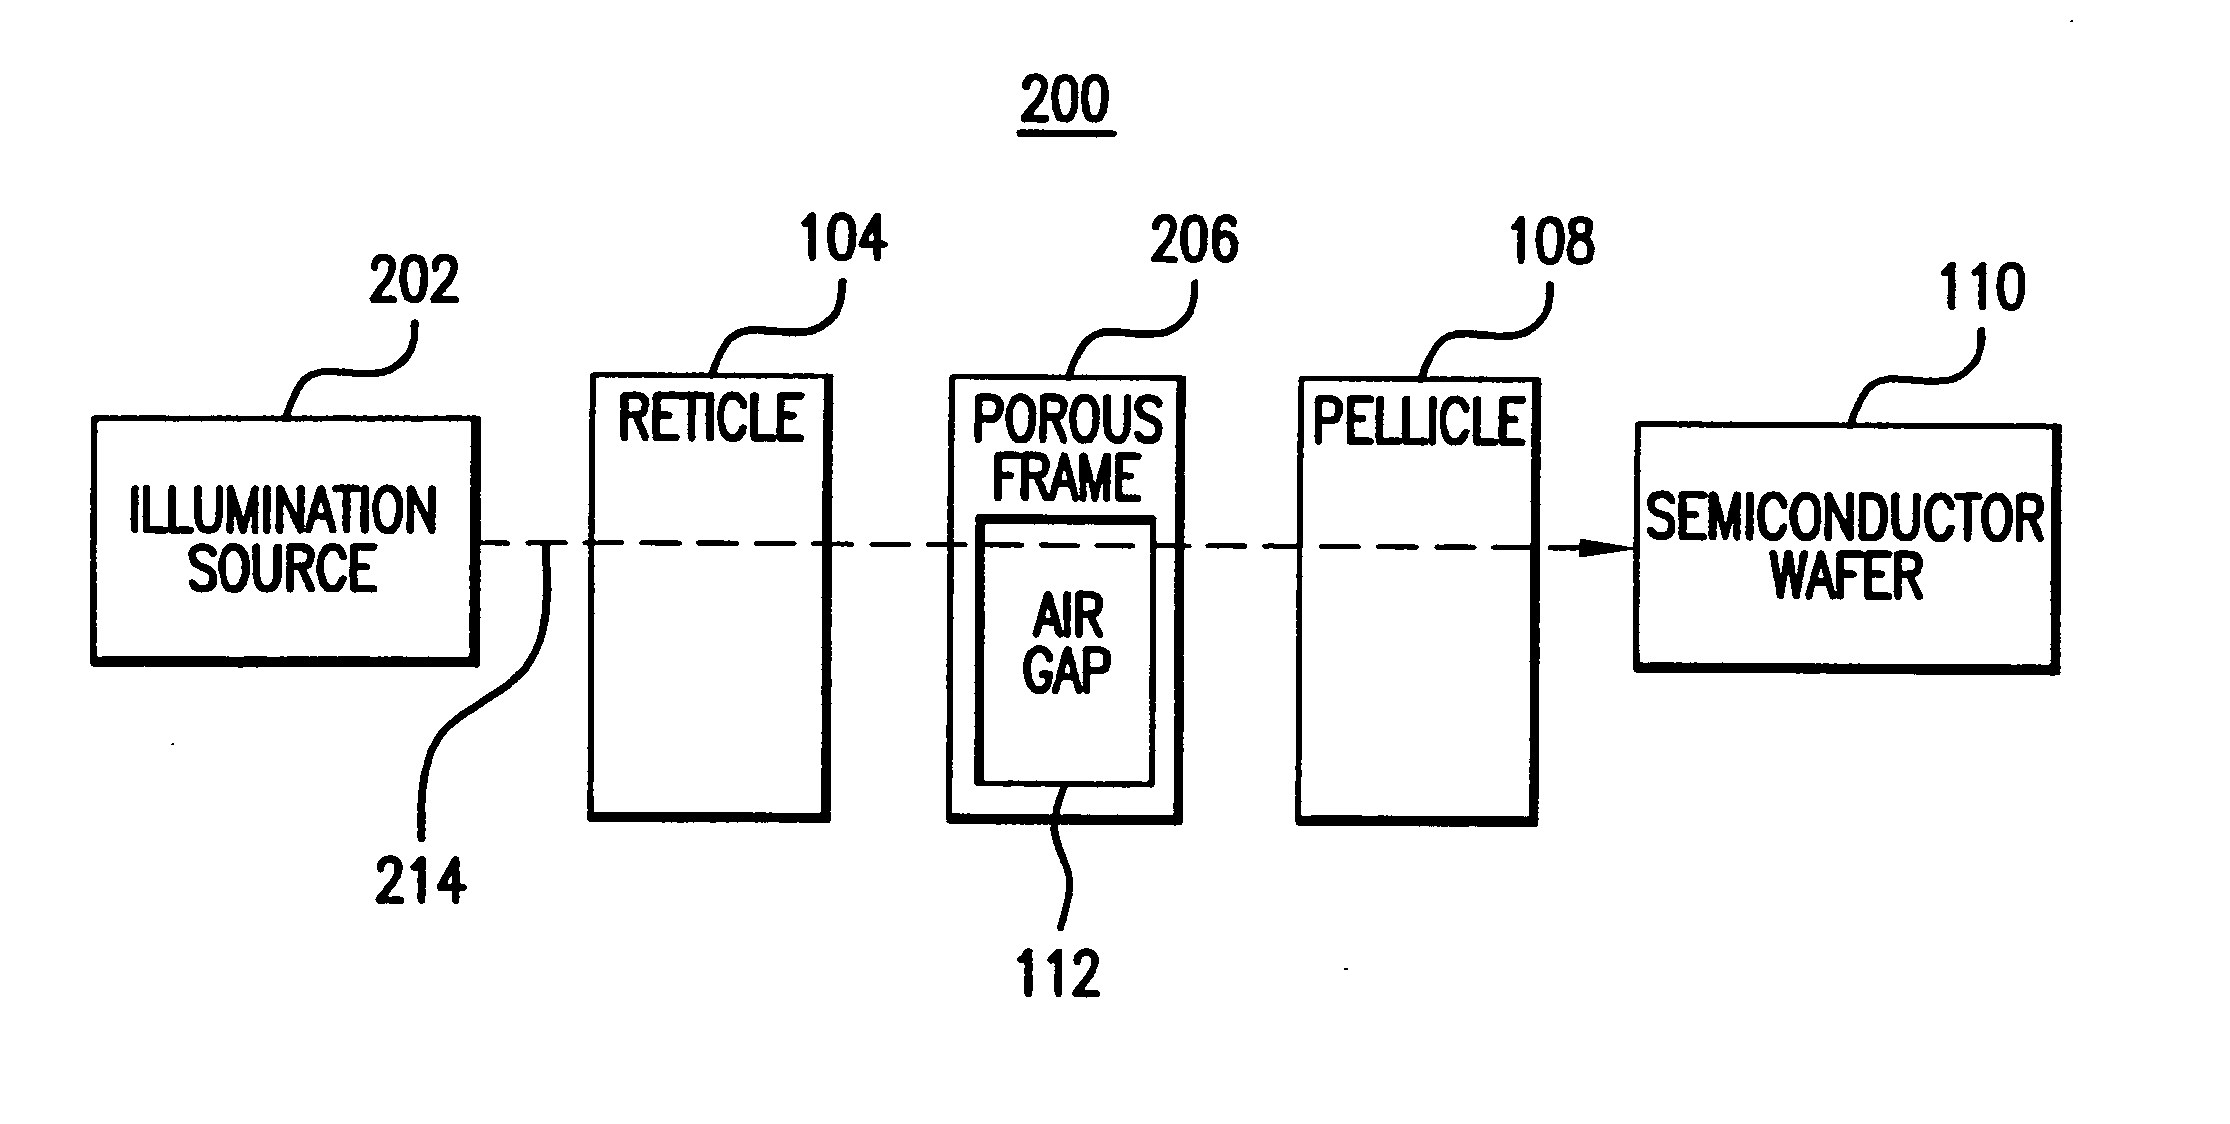 Method and system for a pellicle frame with heightened bonding surfaces (as amended)